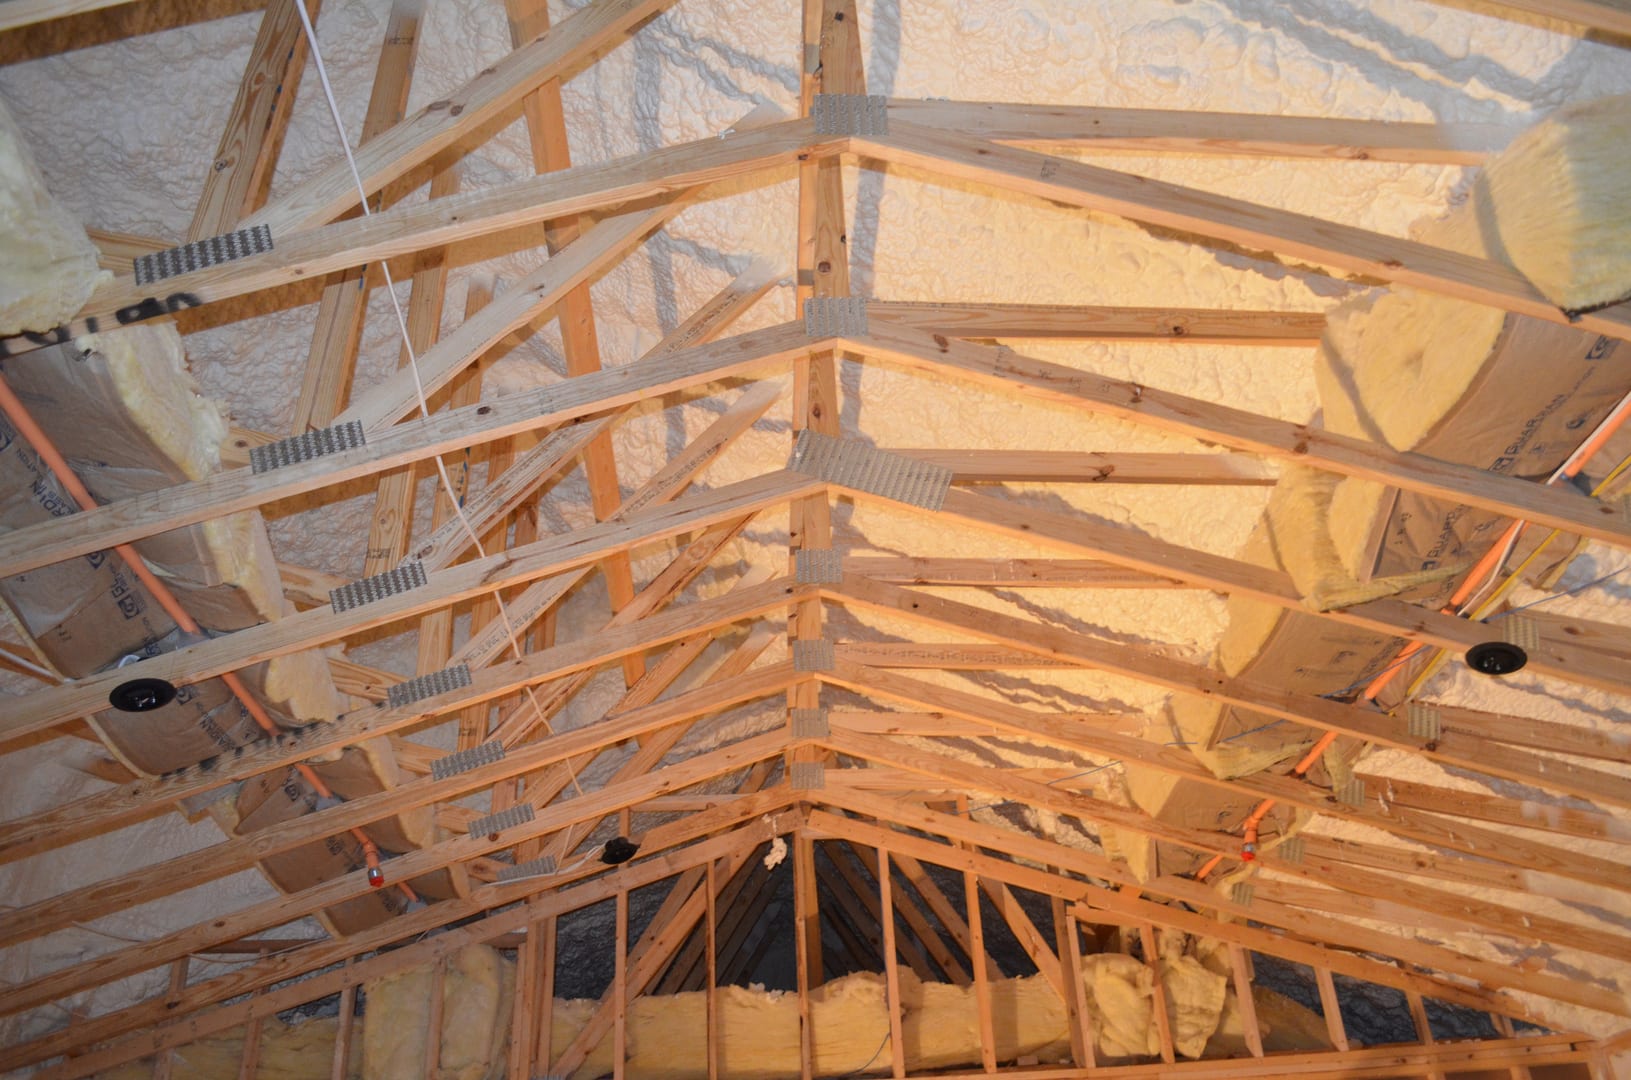 A view of the inside of a house with exposed rafters.